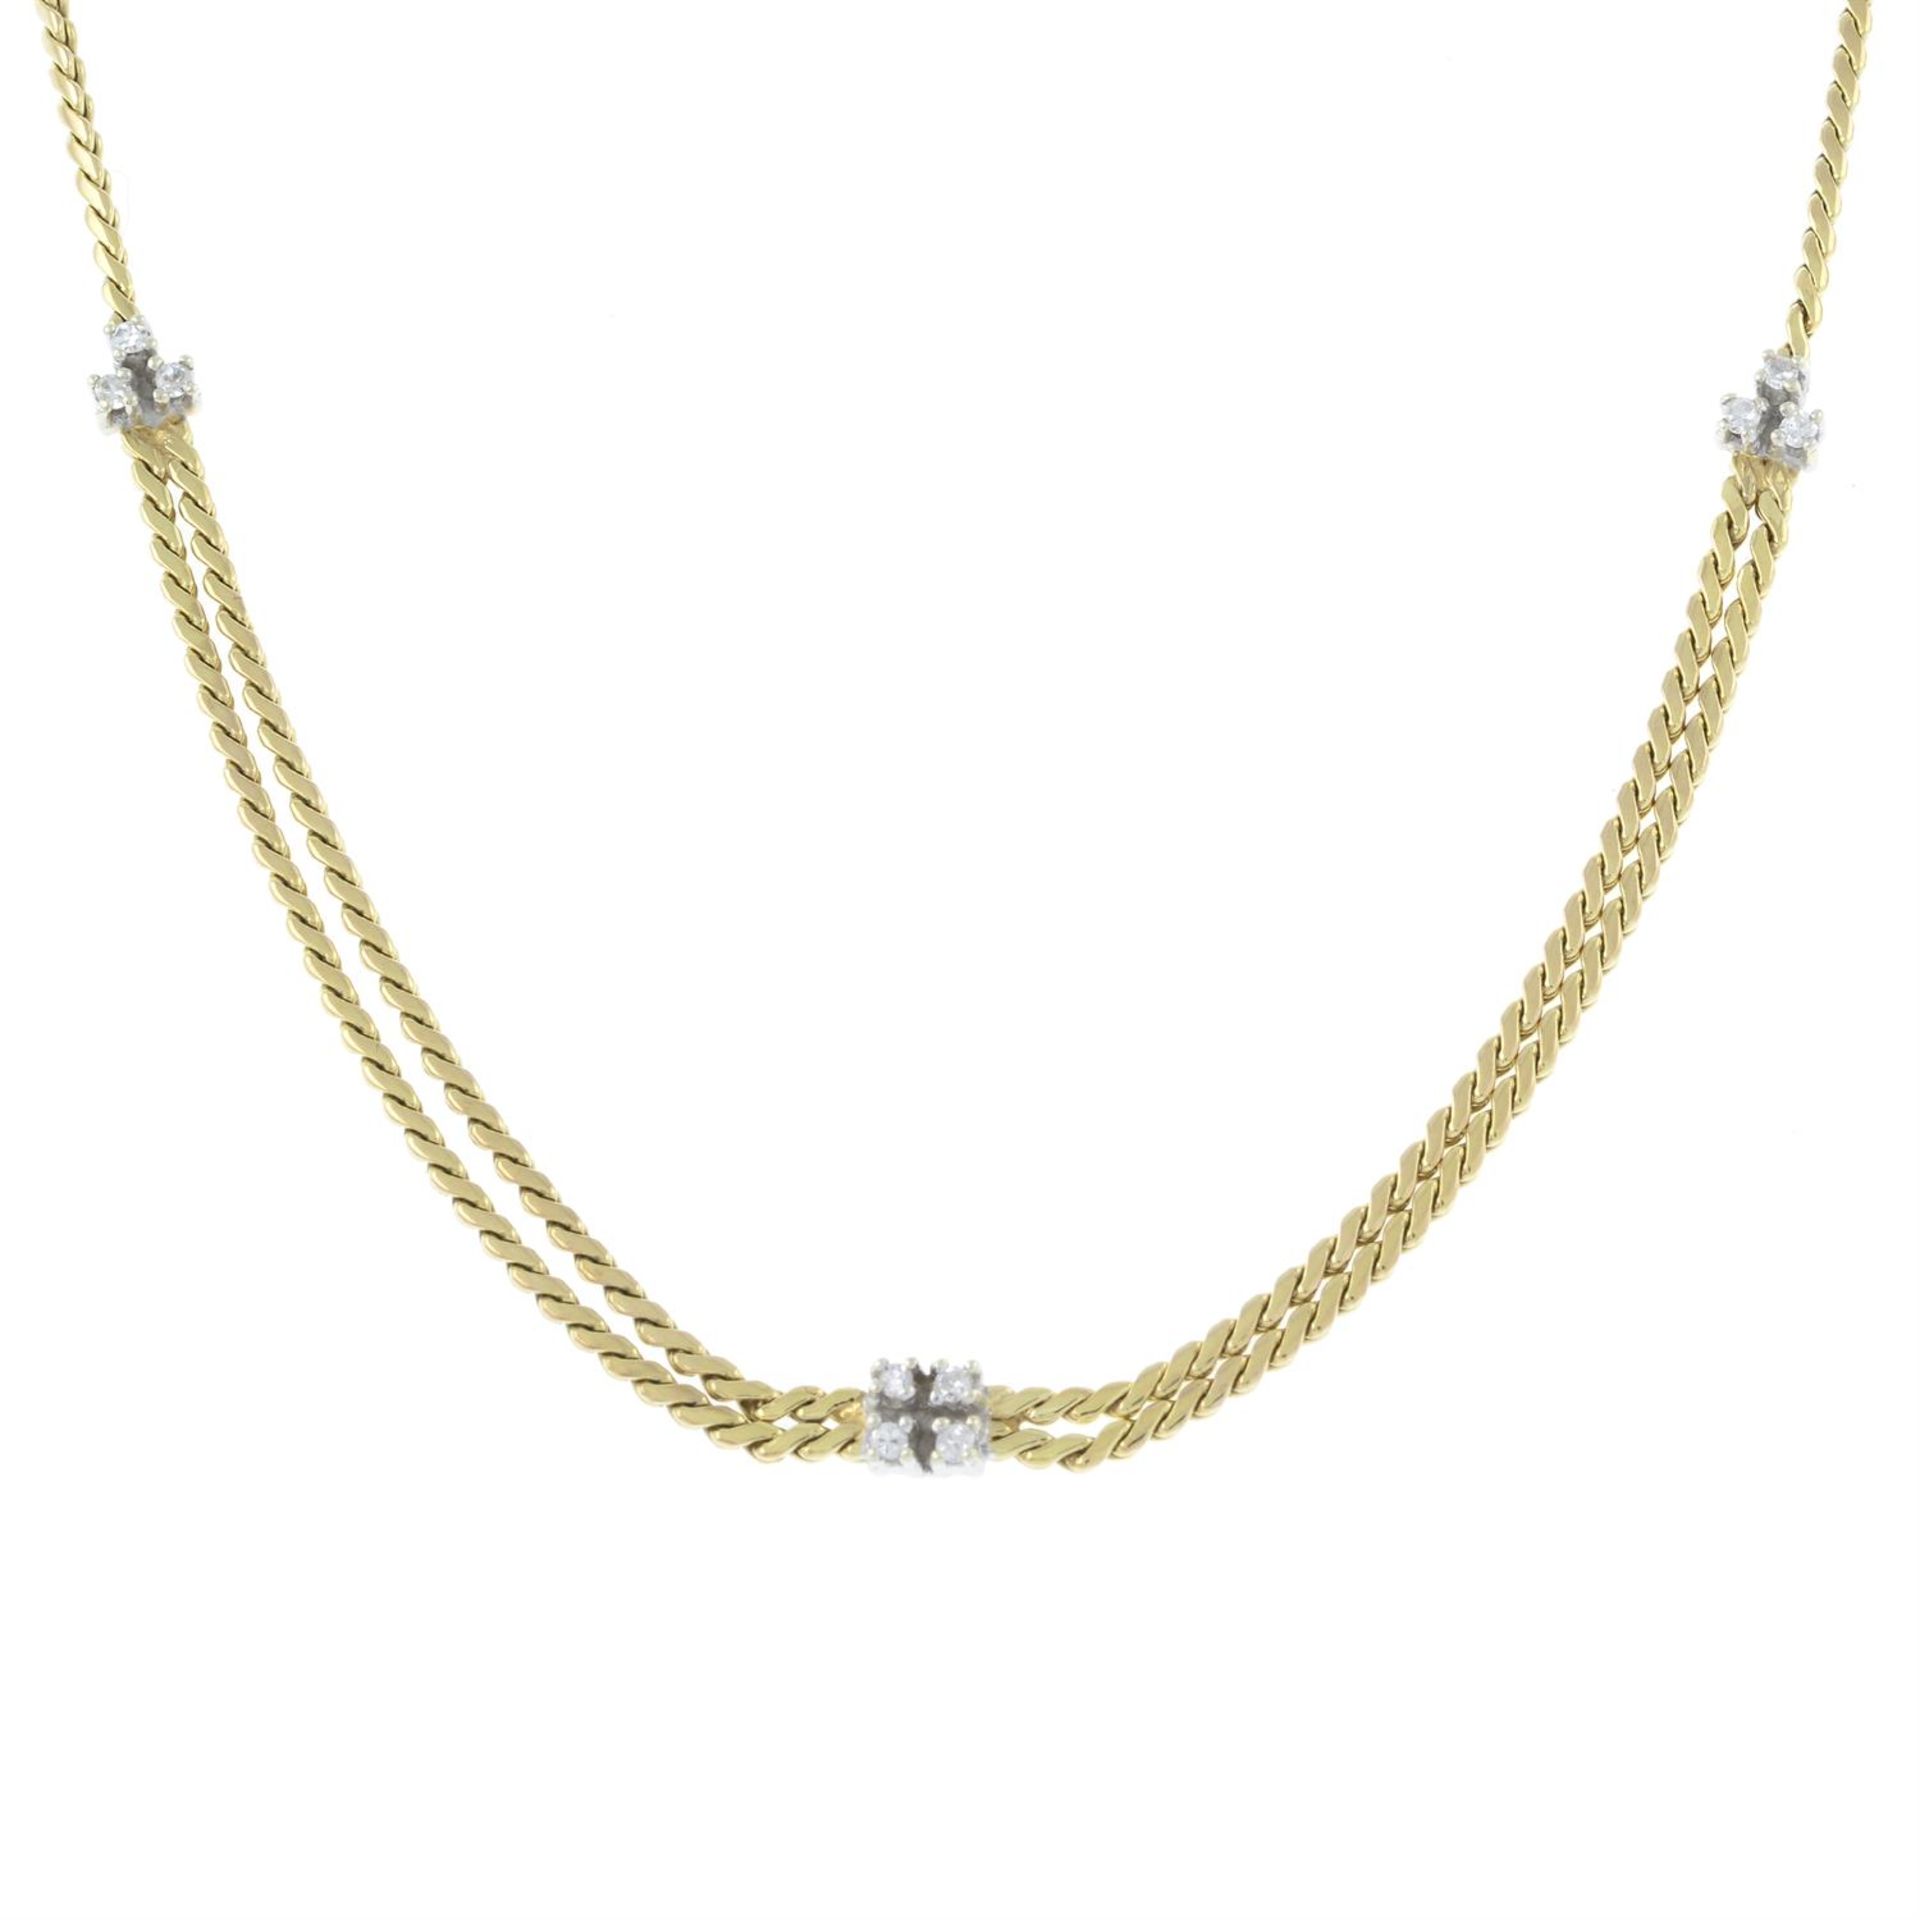 A 9ct gold single-cut diamond accent necklace, with added extension chain.